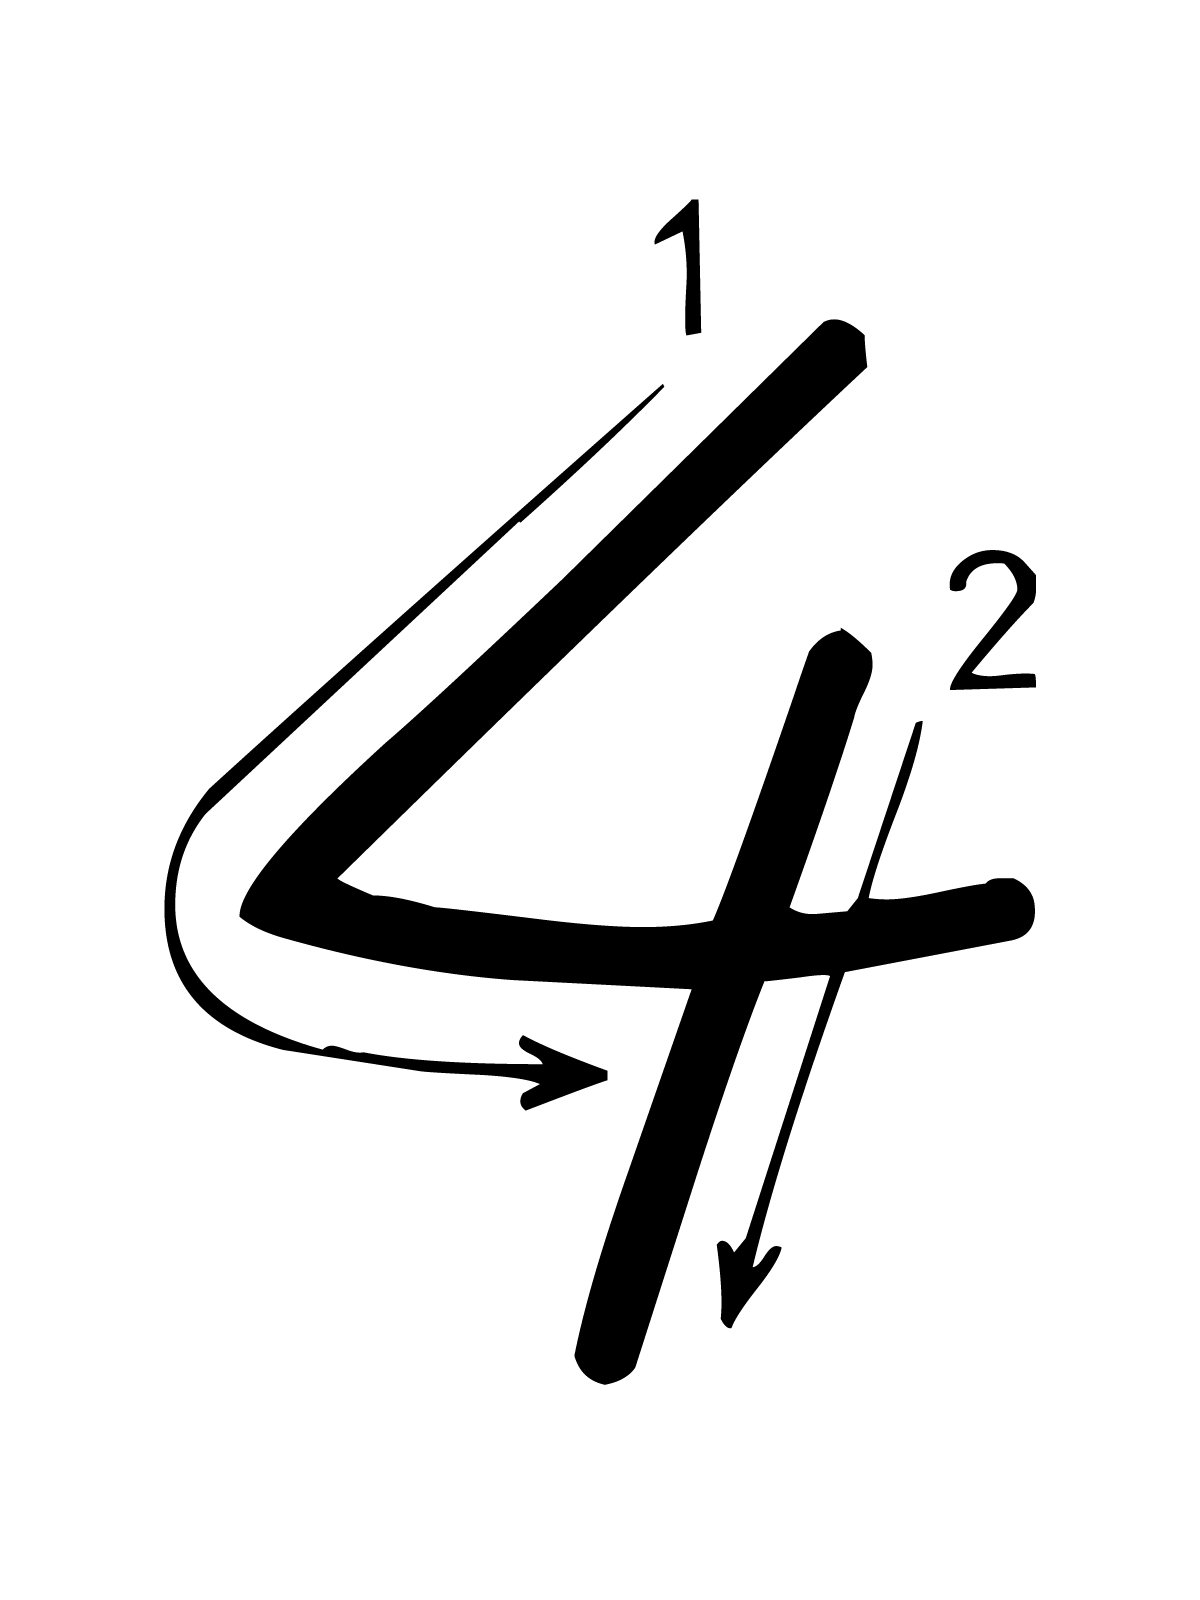 Letters and numbers - Number 4 (four) with indications cursive movement